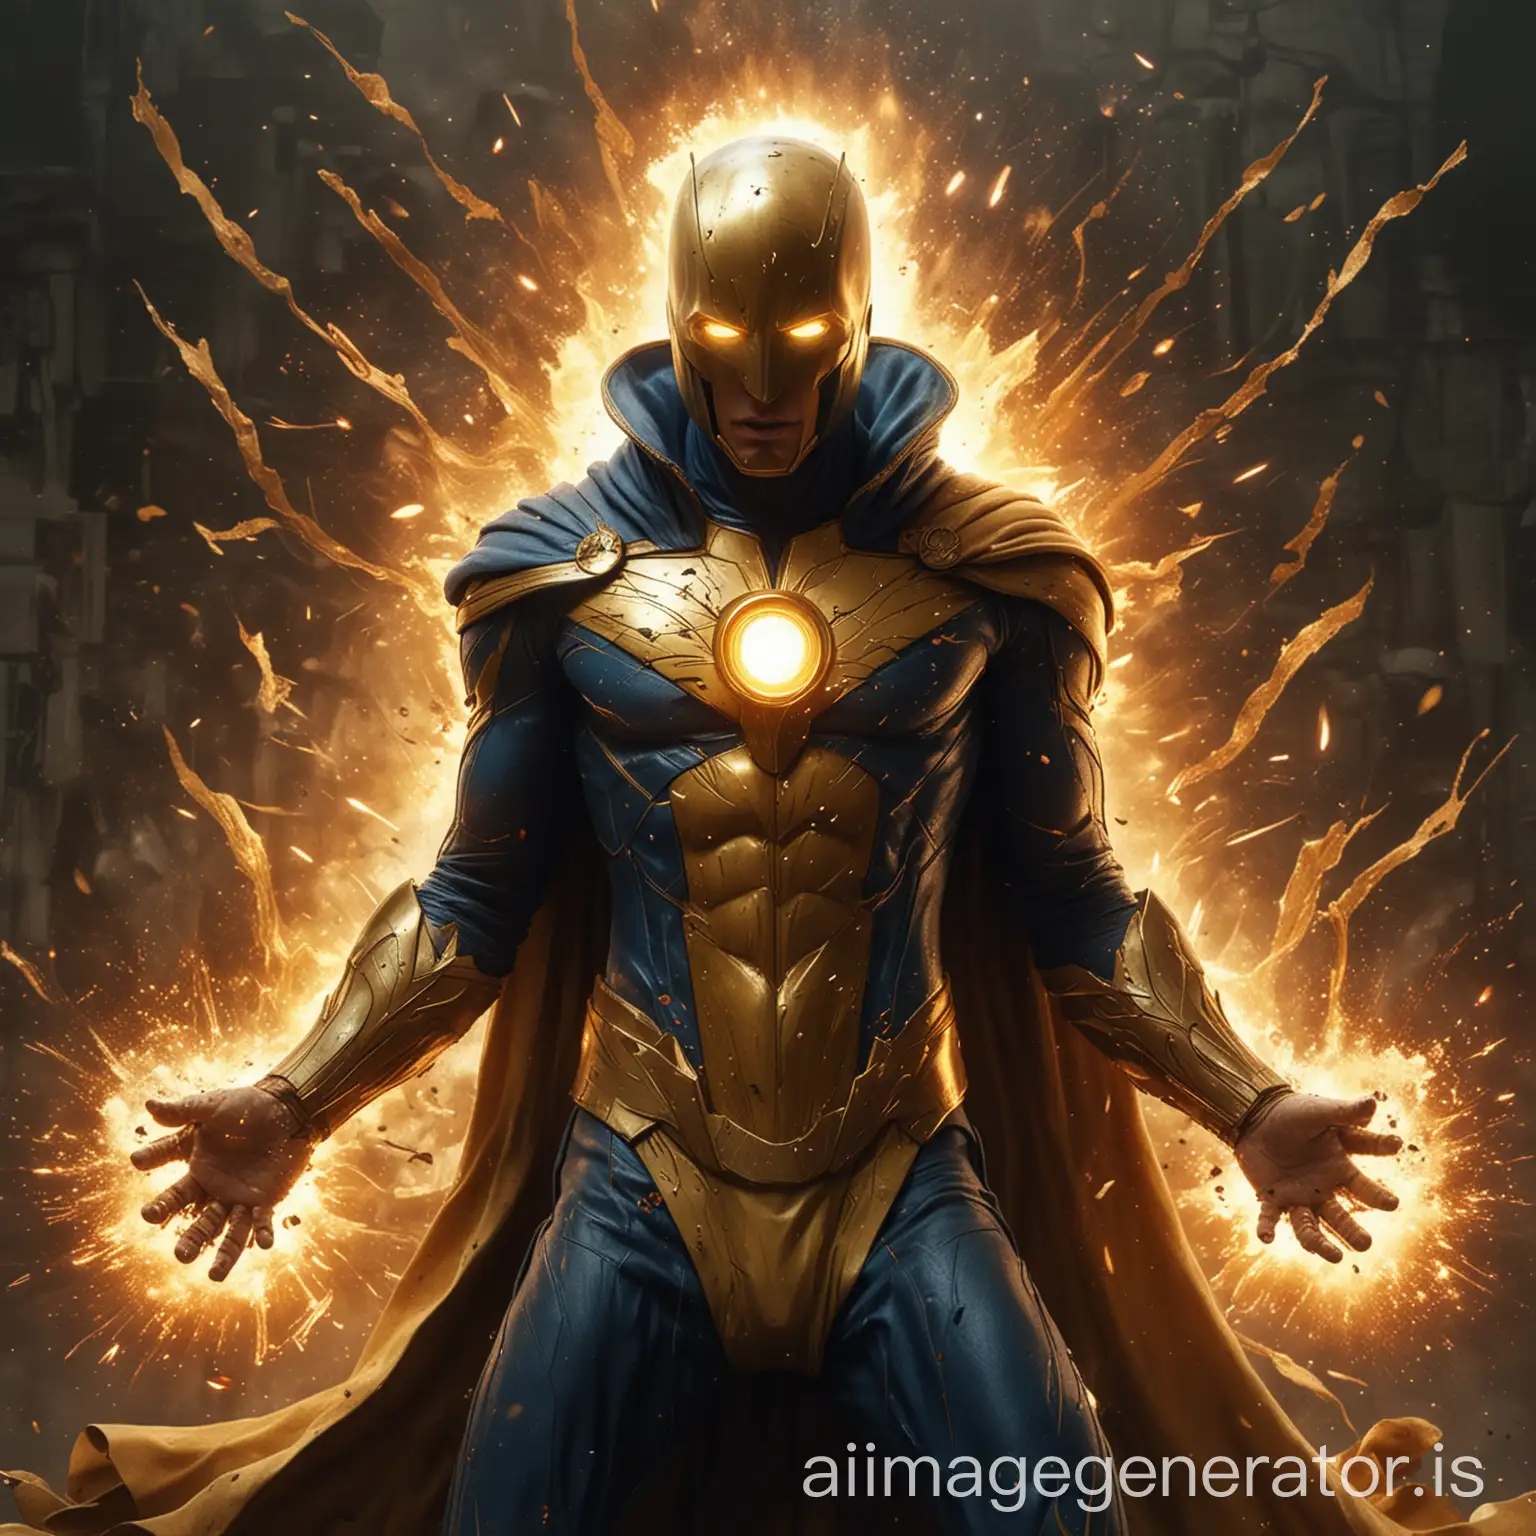 Doctor-Fate-in-Dynamic-Action-with-Explosive-Background